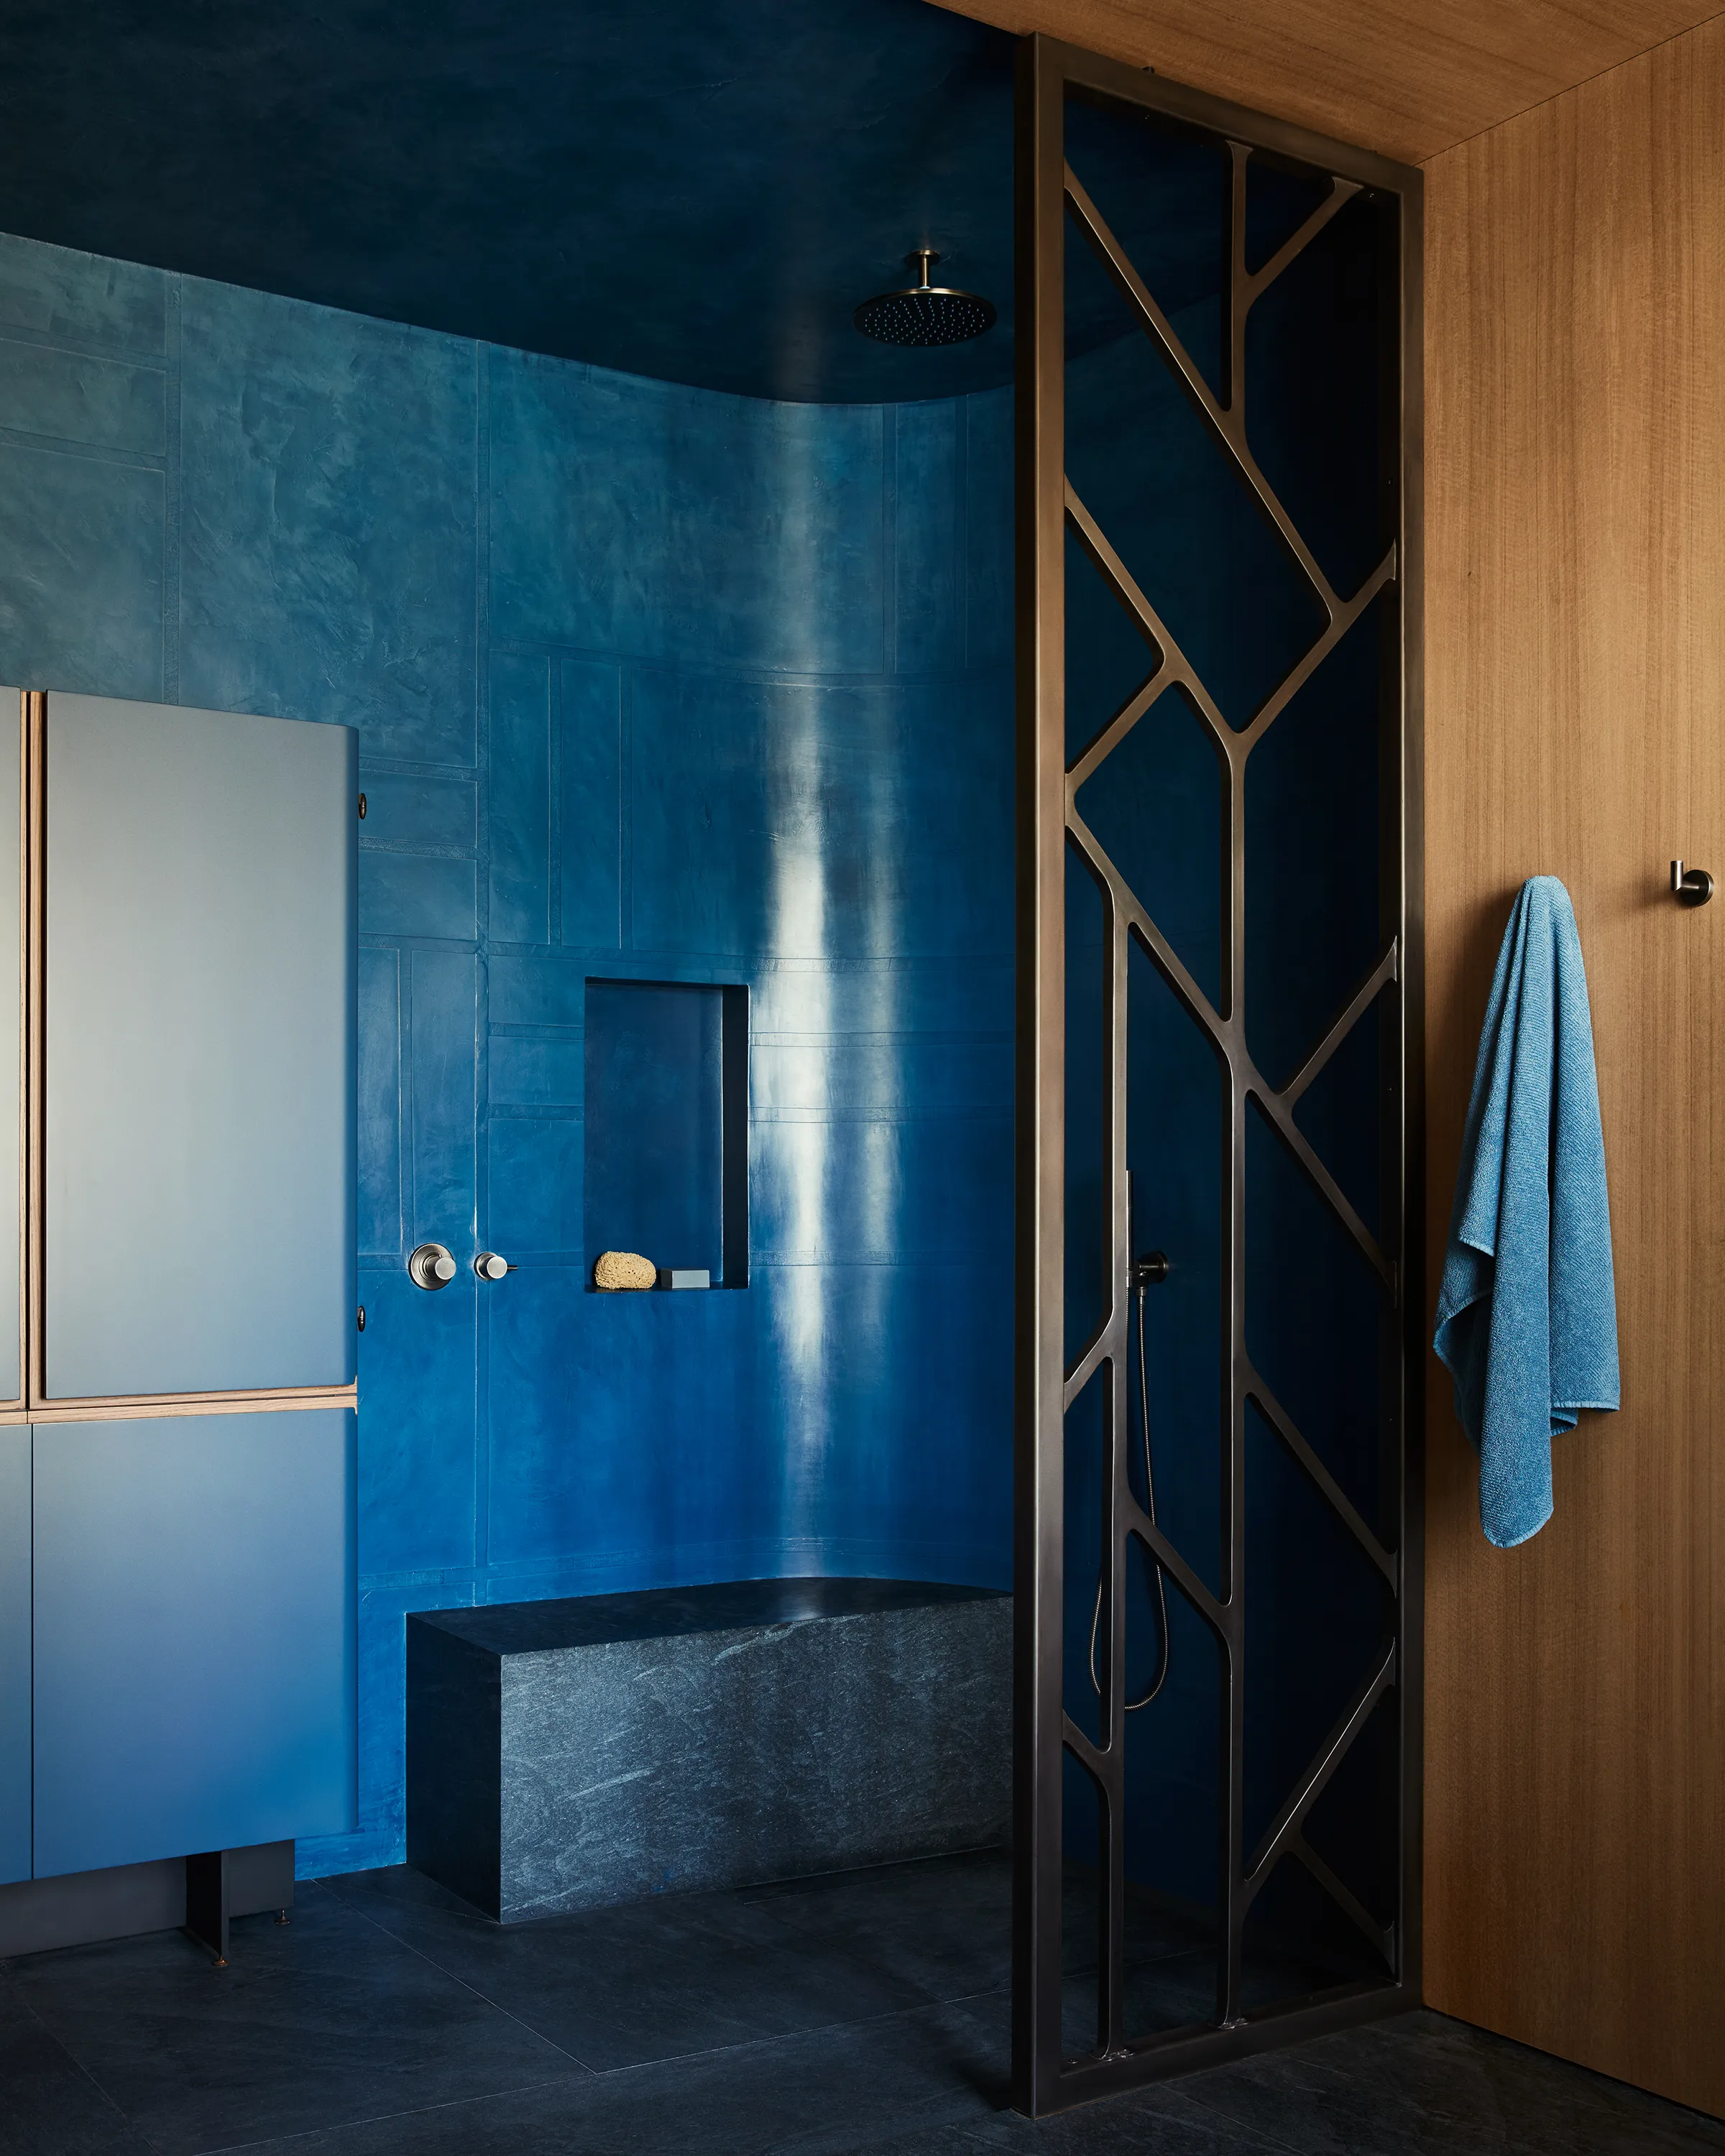 A bespoke Tadelakt Shower by Color Atelier steeps the motif of a Chroma x Wyatt Studio metal screen in saturated hues.